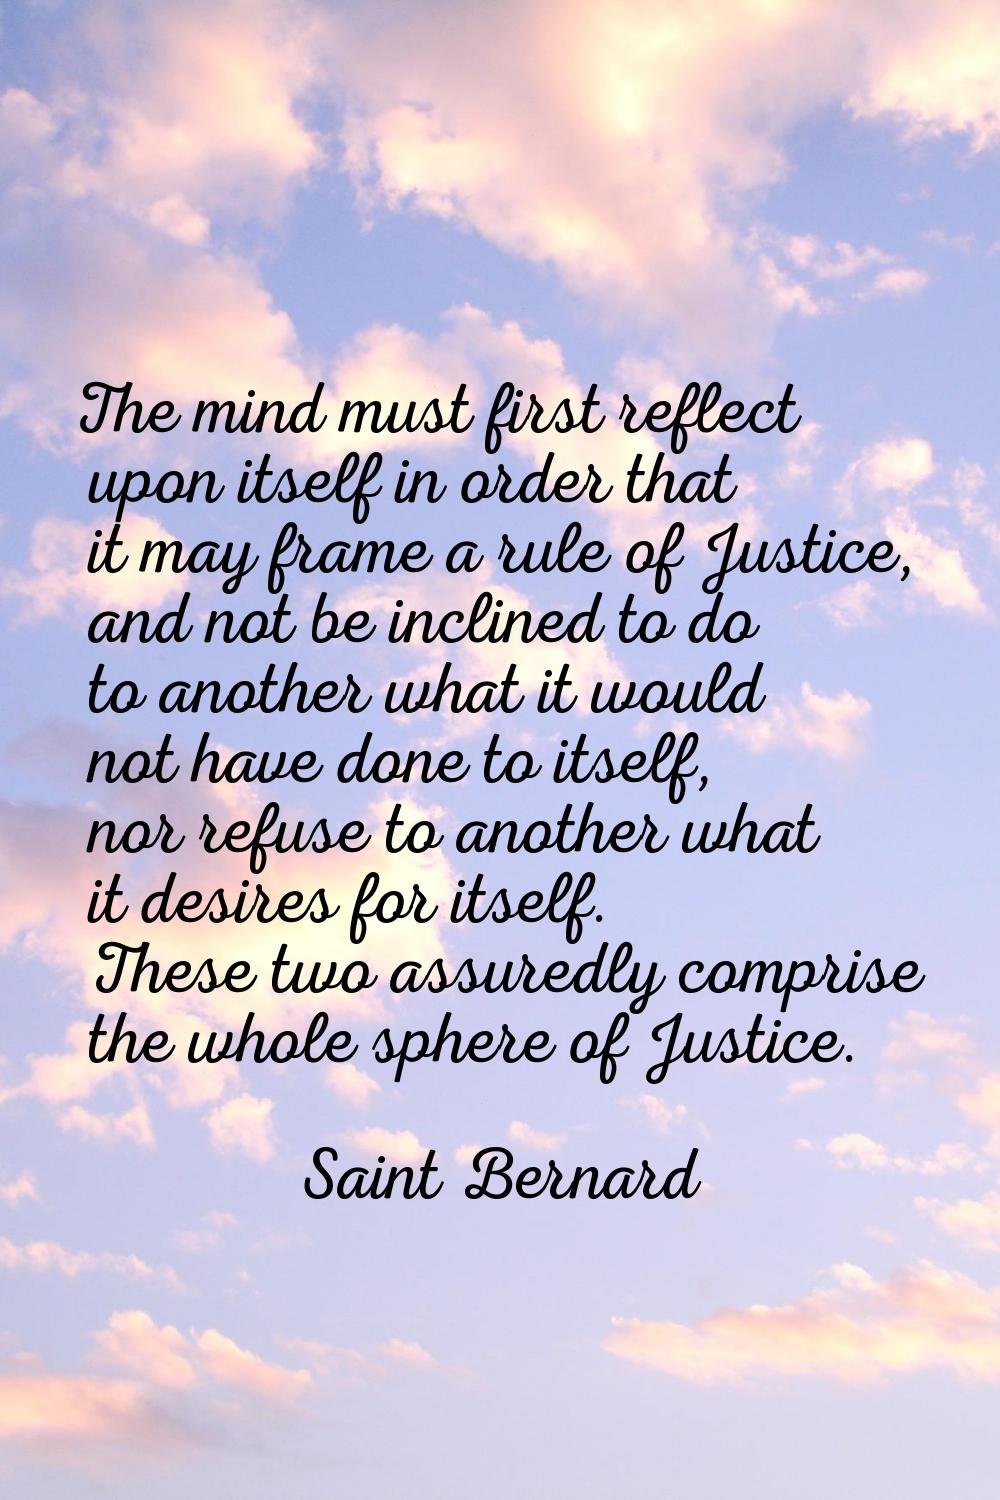 The mind must first reflect upon itself in order that it may frame a rule of Justice, and not be in